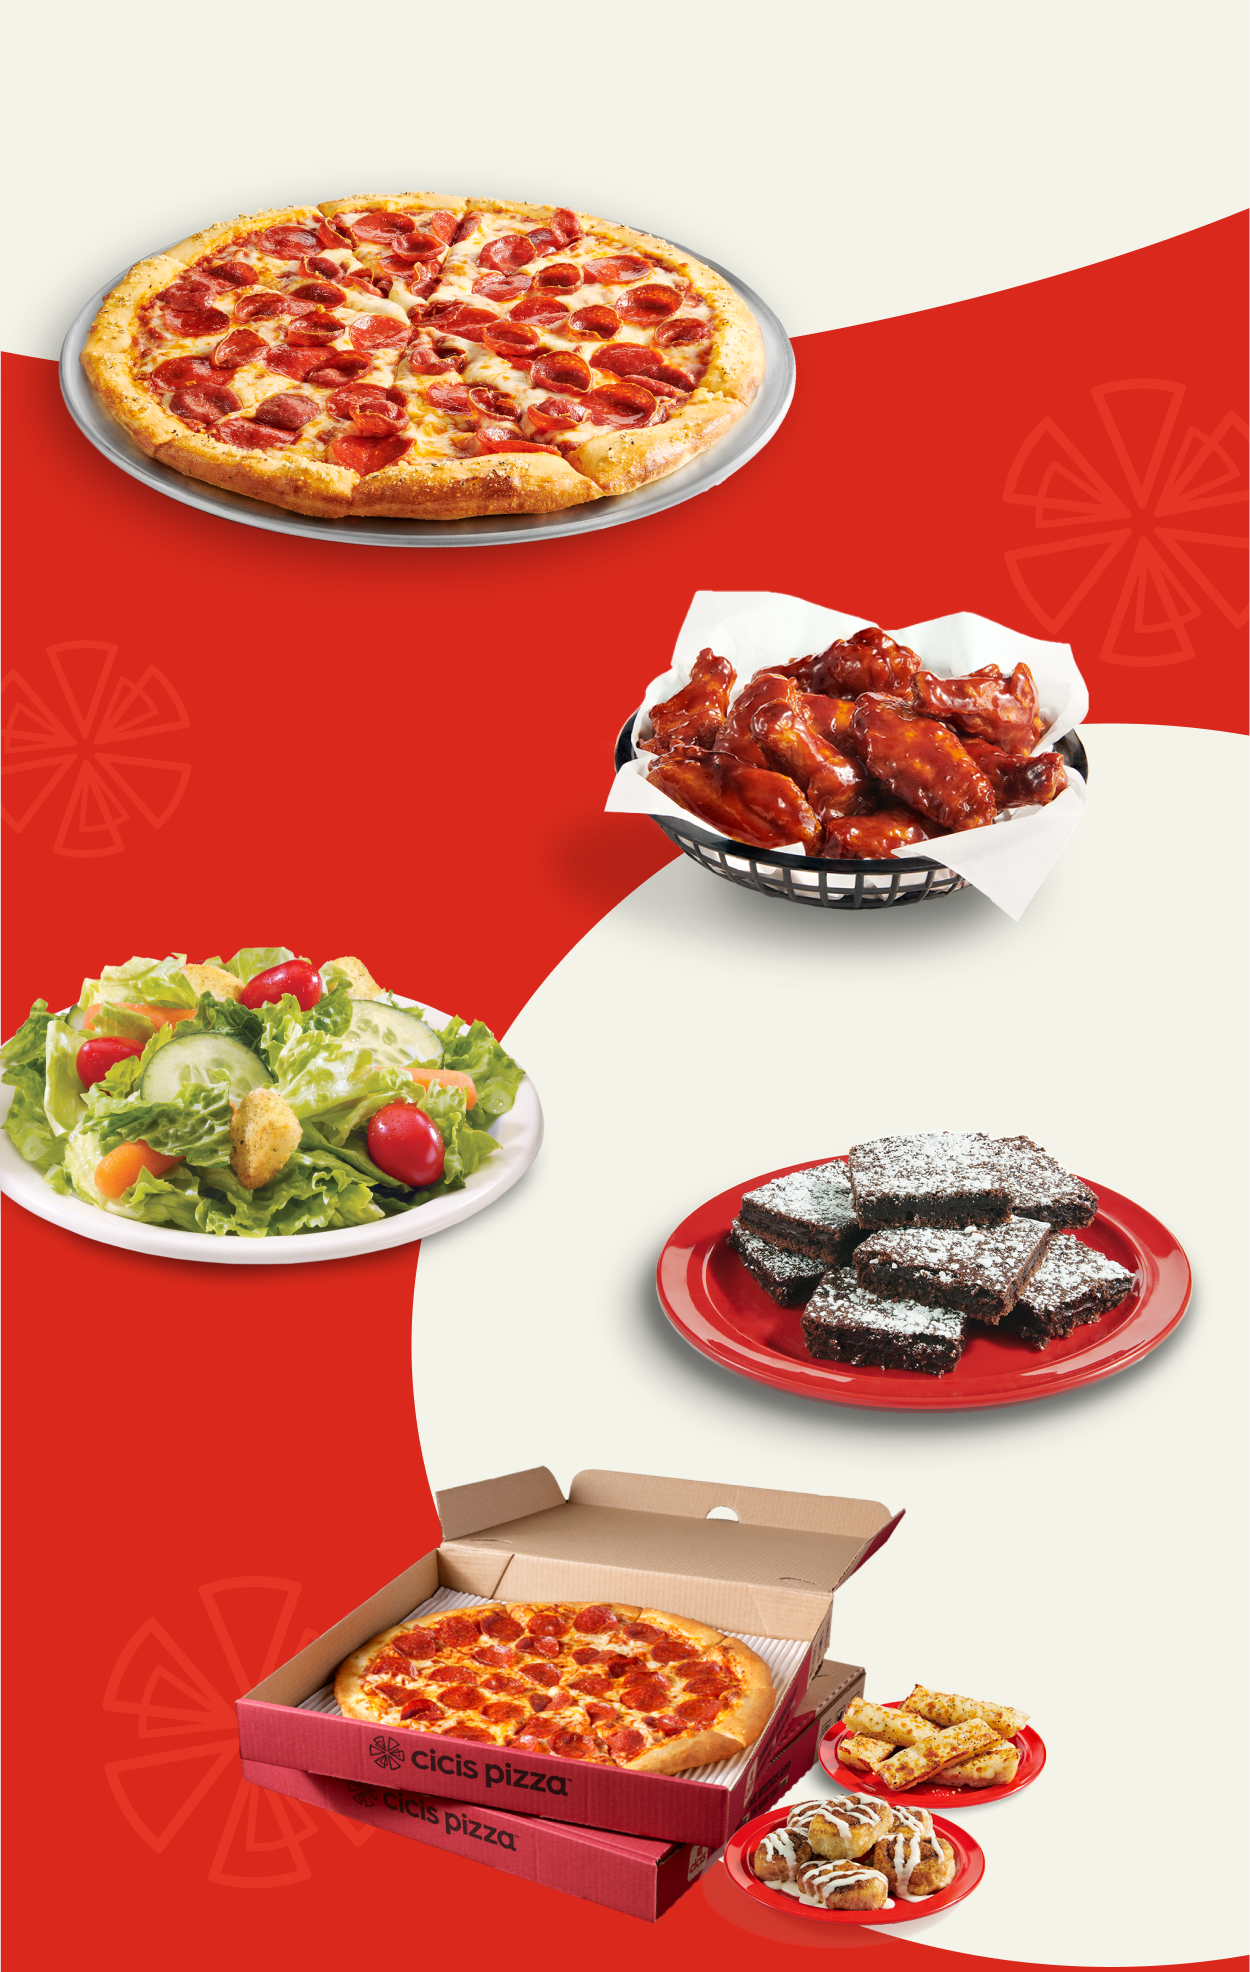 Cicis menu items spaced out vertically on a curved red and beige background. Top is a Cicis pepperoni pizza on a tray, then a basket of bone-in chicken wings, then a plated mixed salad, a plated stack of brownies, and last stacked Cicis pizza boxes with one open showing a pepperoni pizza. Next to the boxes are a plate of cinnamon rolls and a plate of garlic cheesy bread.